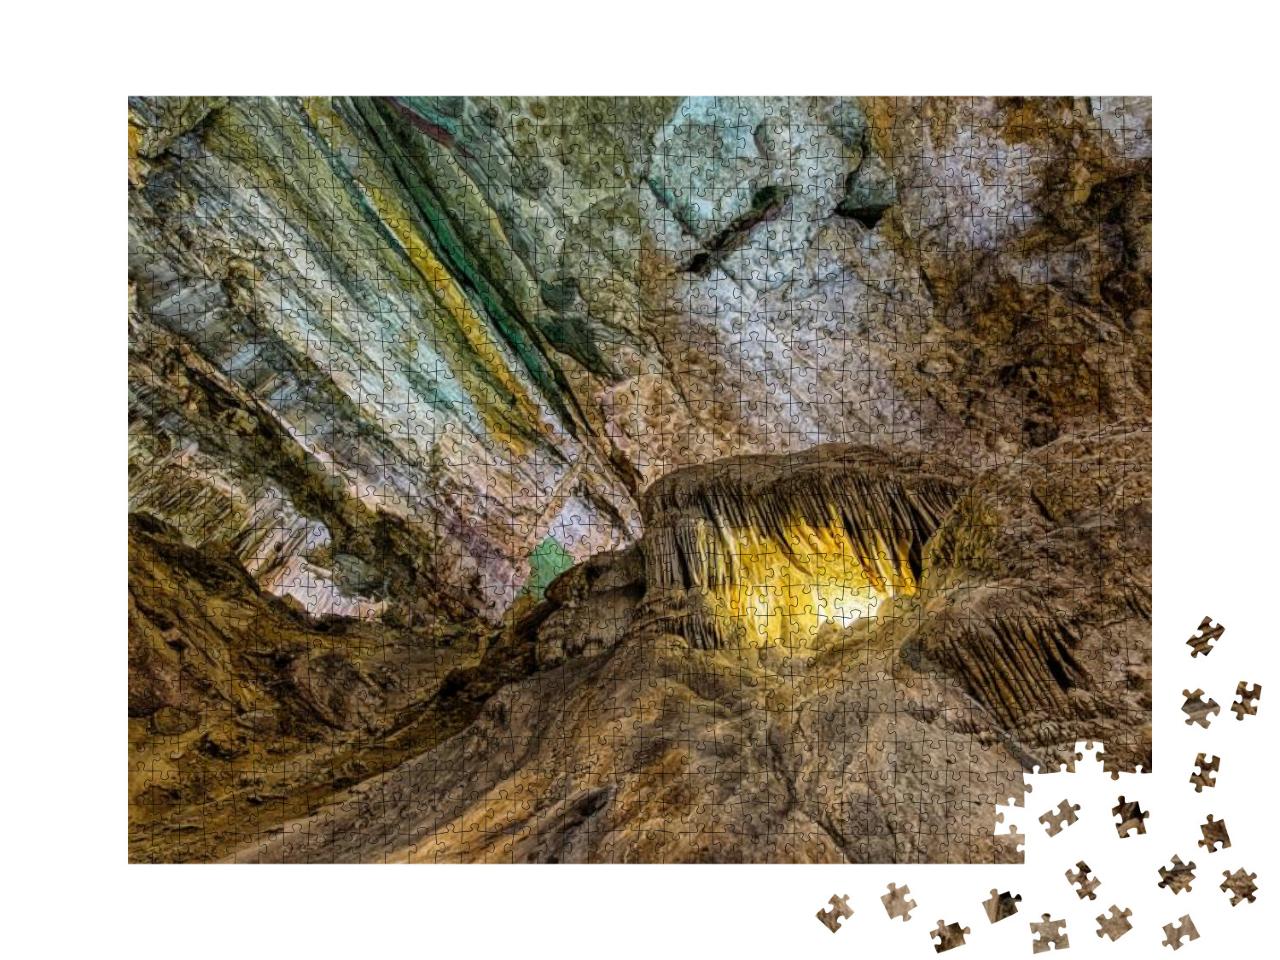 Whales Mouth Formation in Carlsbad Caverns National Park... Jigsaw Puzzle with 1000 pieces